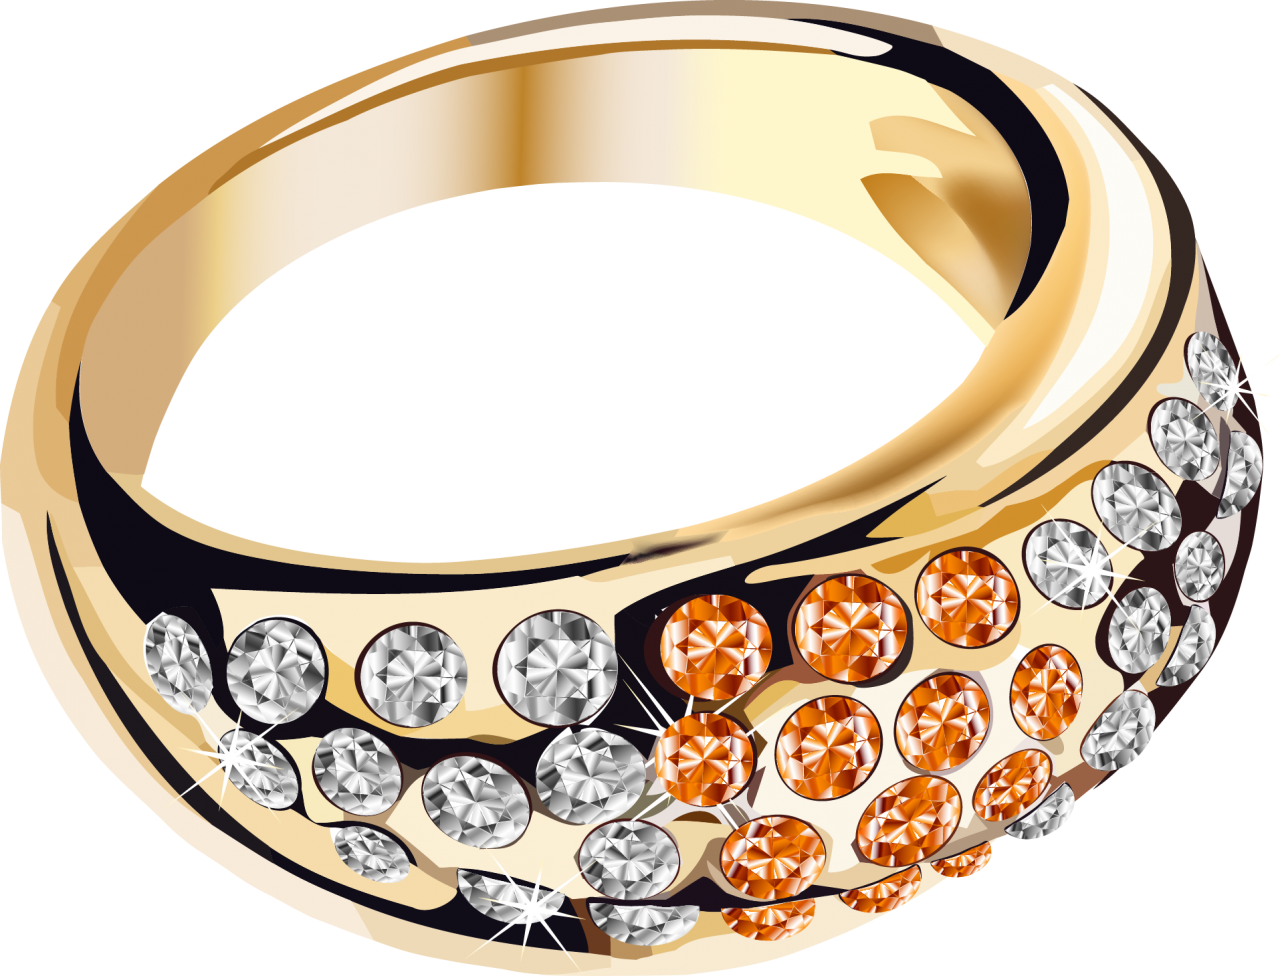 Gold Ring Png Image Purepng Free Transparent Cc0 Png Image Library